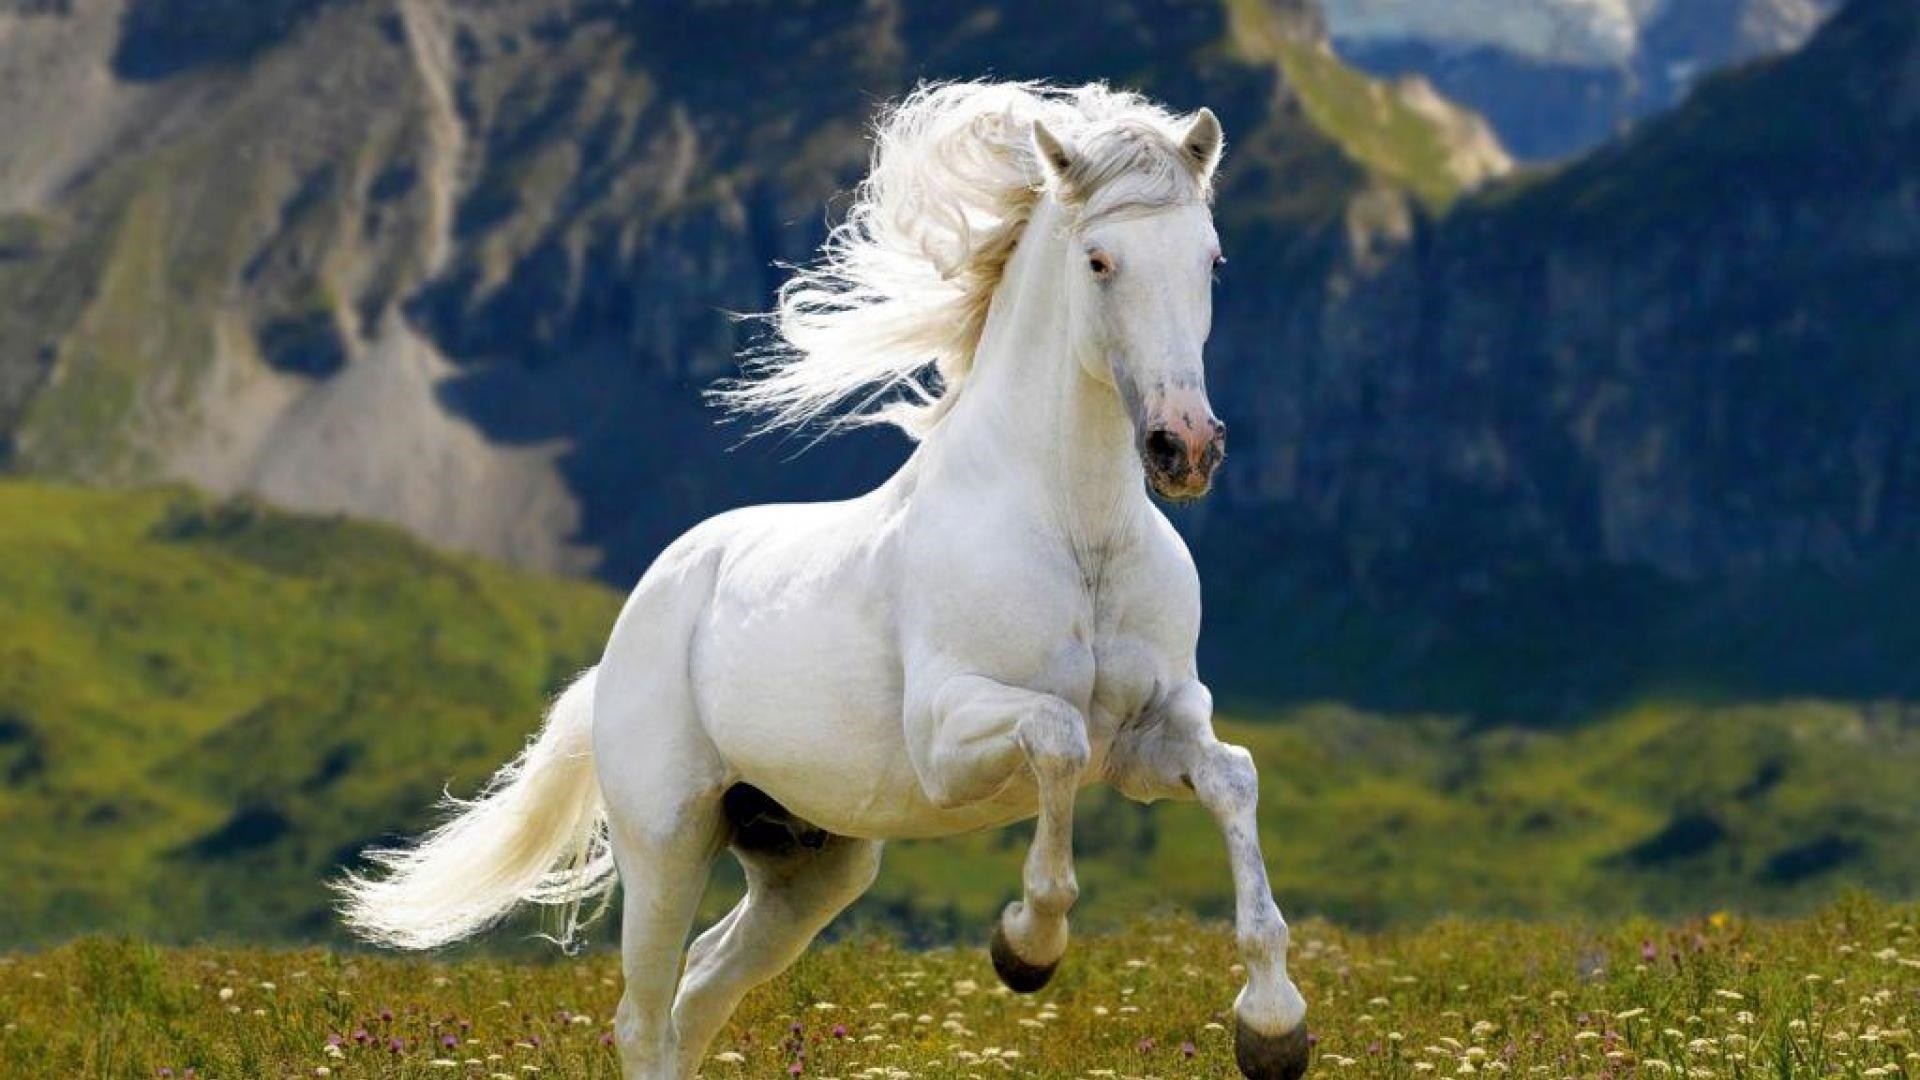 Horse High Definition Wallpapers - High Definition Pictures Of Horses -  1920x1080 Wallpaper 